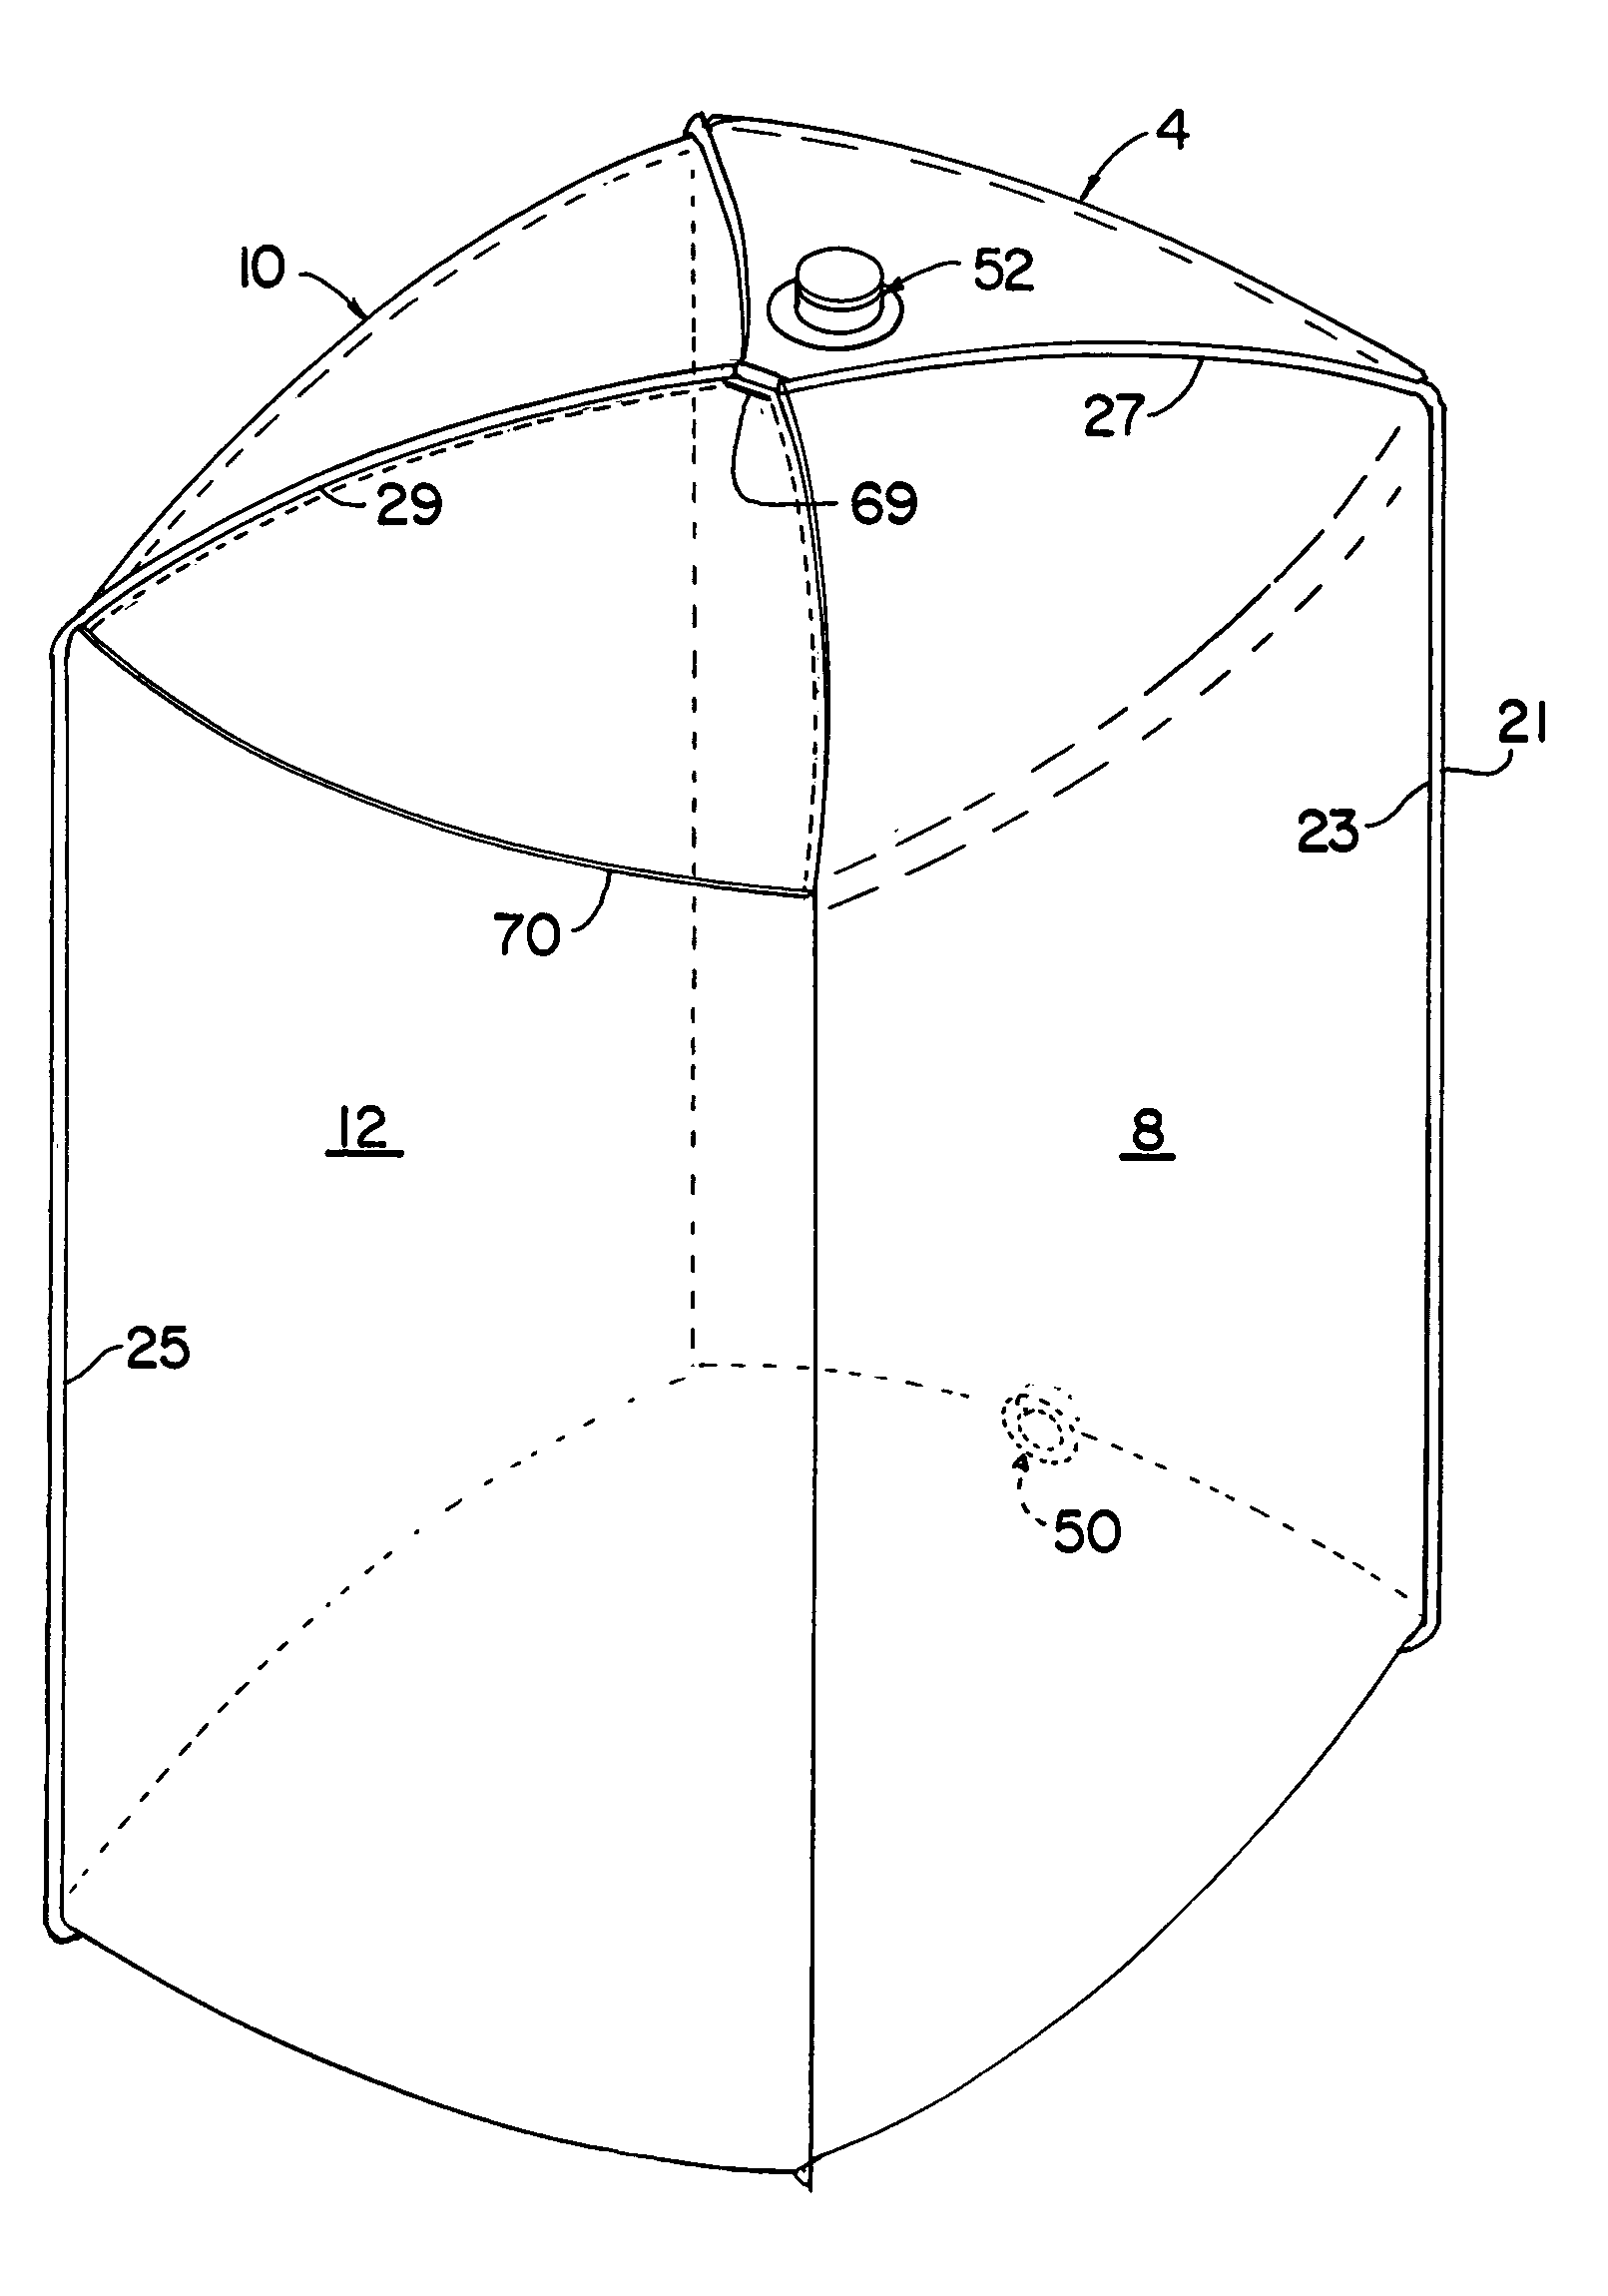 Bag with flap for bag-in-box container system